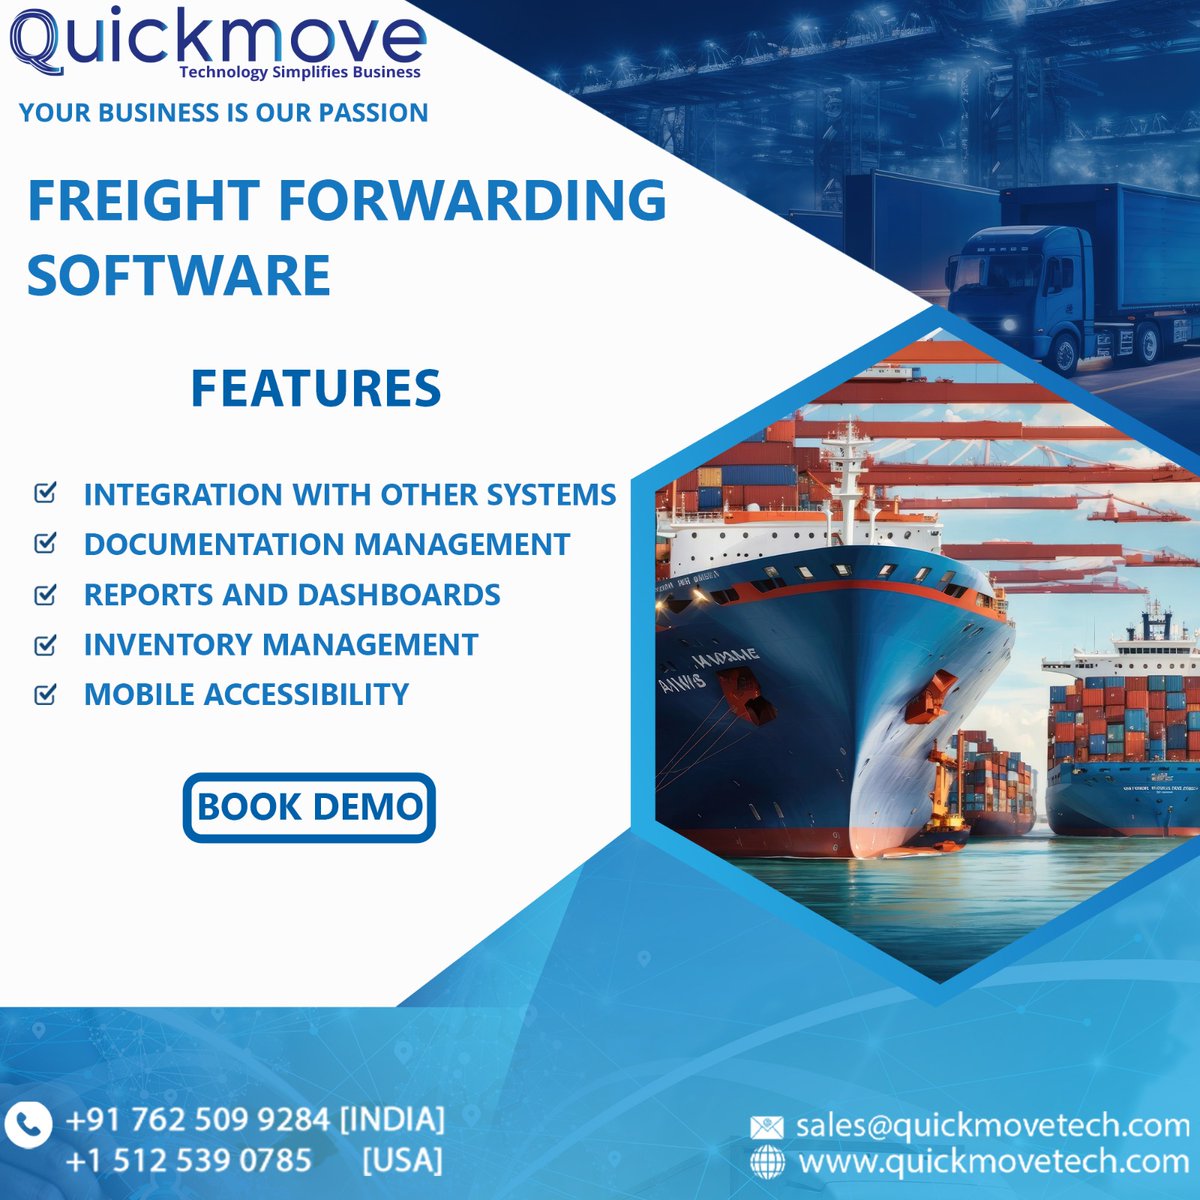 Freight forwarding software is a comprehensive logistics solution designed to facilitate and optimize the management of freight and cargo shipments.

#quickmove #quickmovetechnologies #LogisticsTechnology #supplychainsolutions #shippingsoftware #freightmanagement